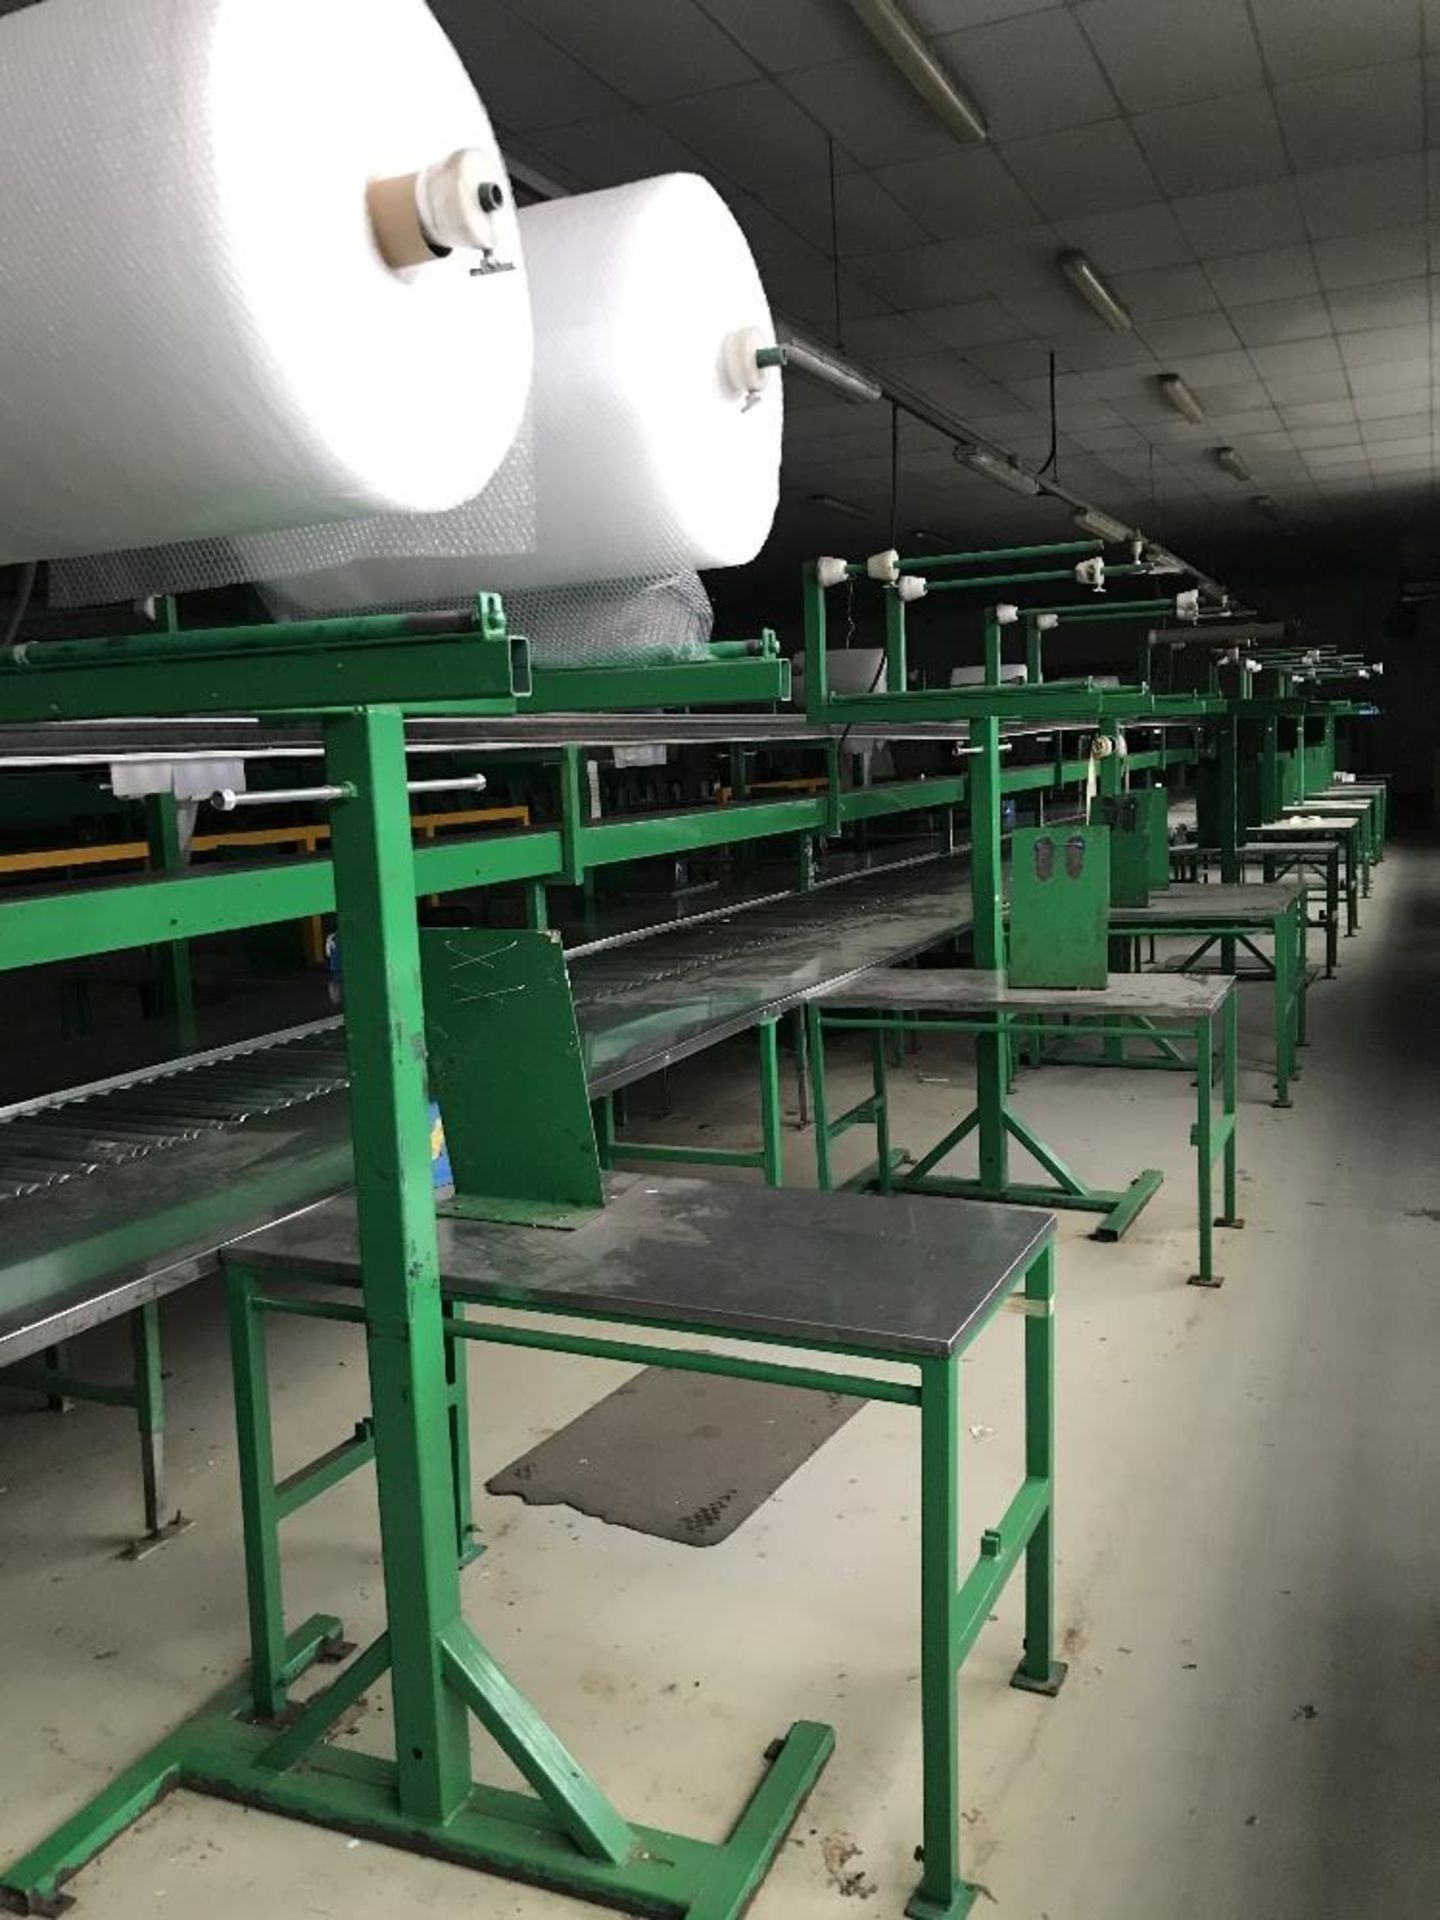 Manual Packing Line - Image 11 of 17